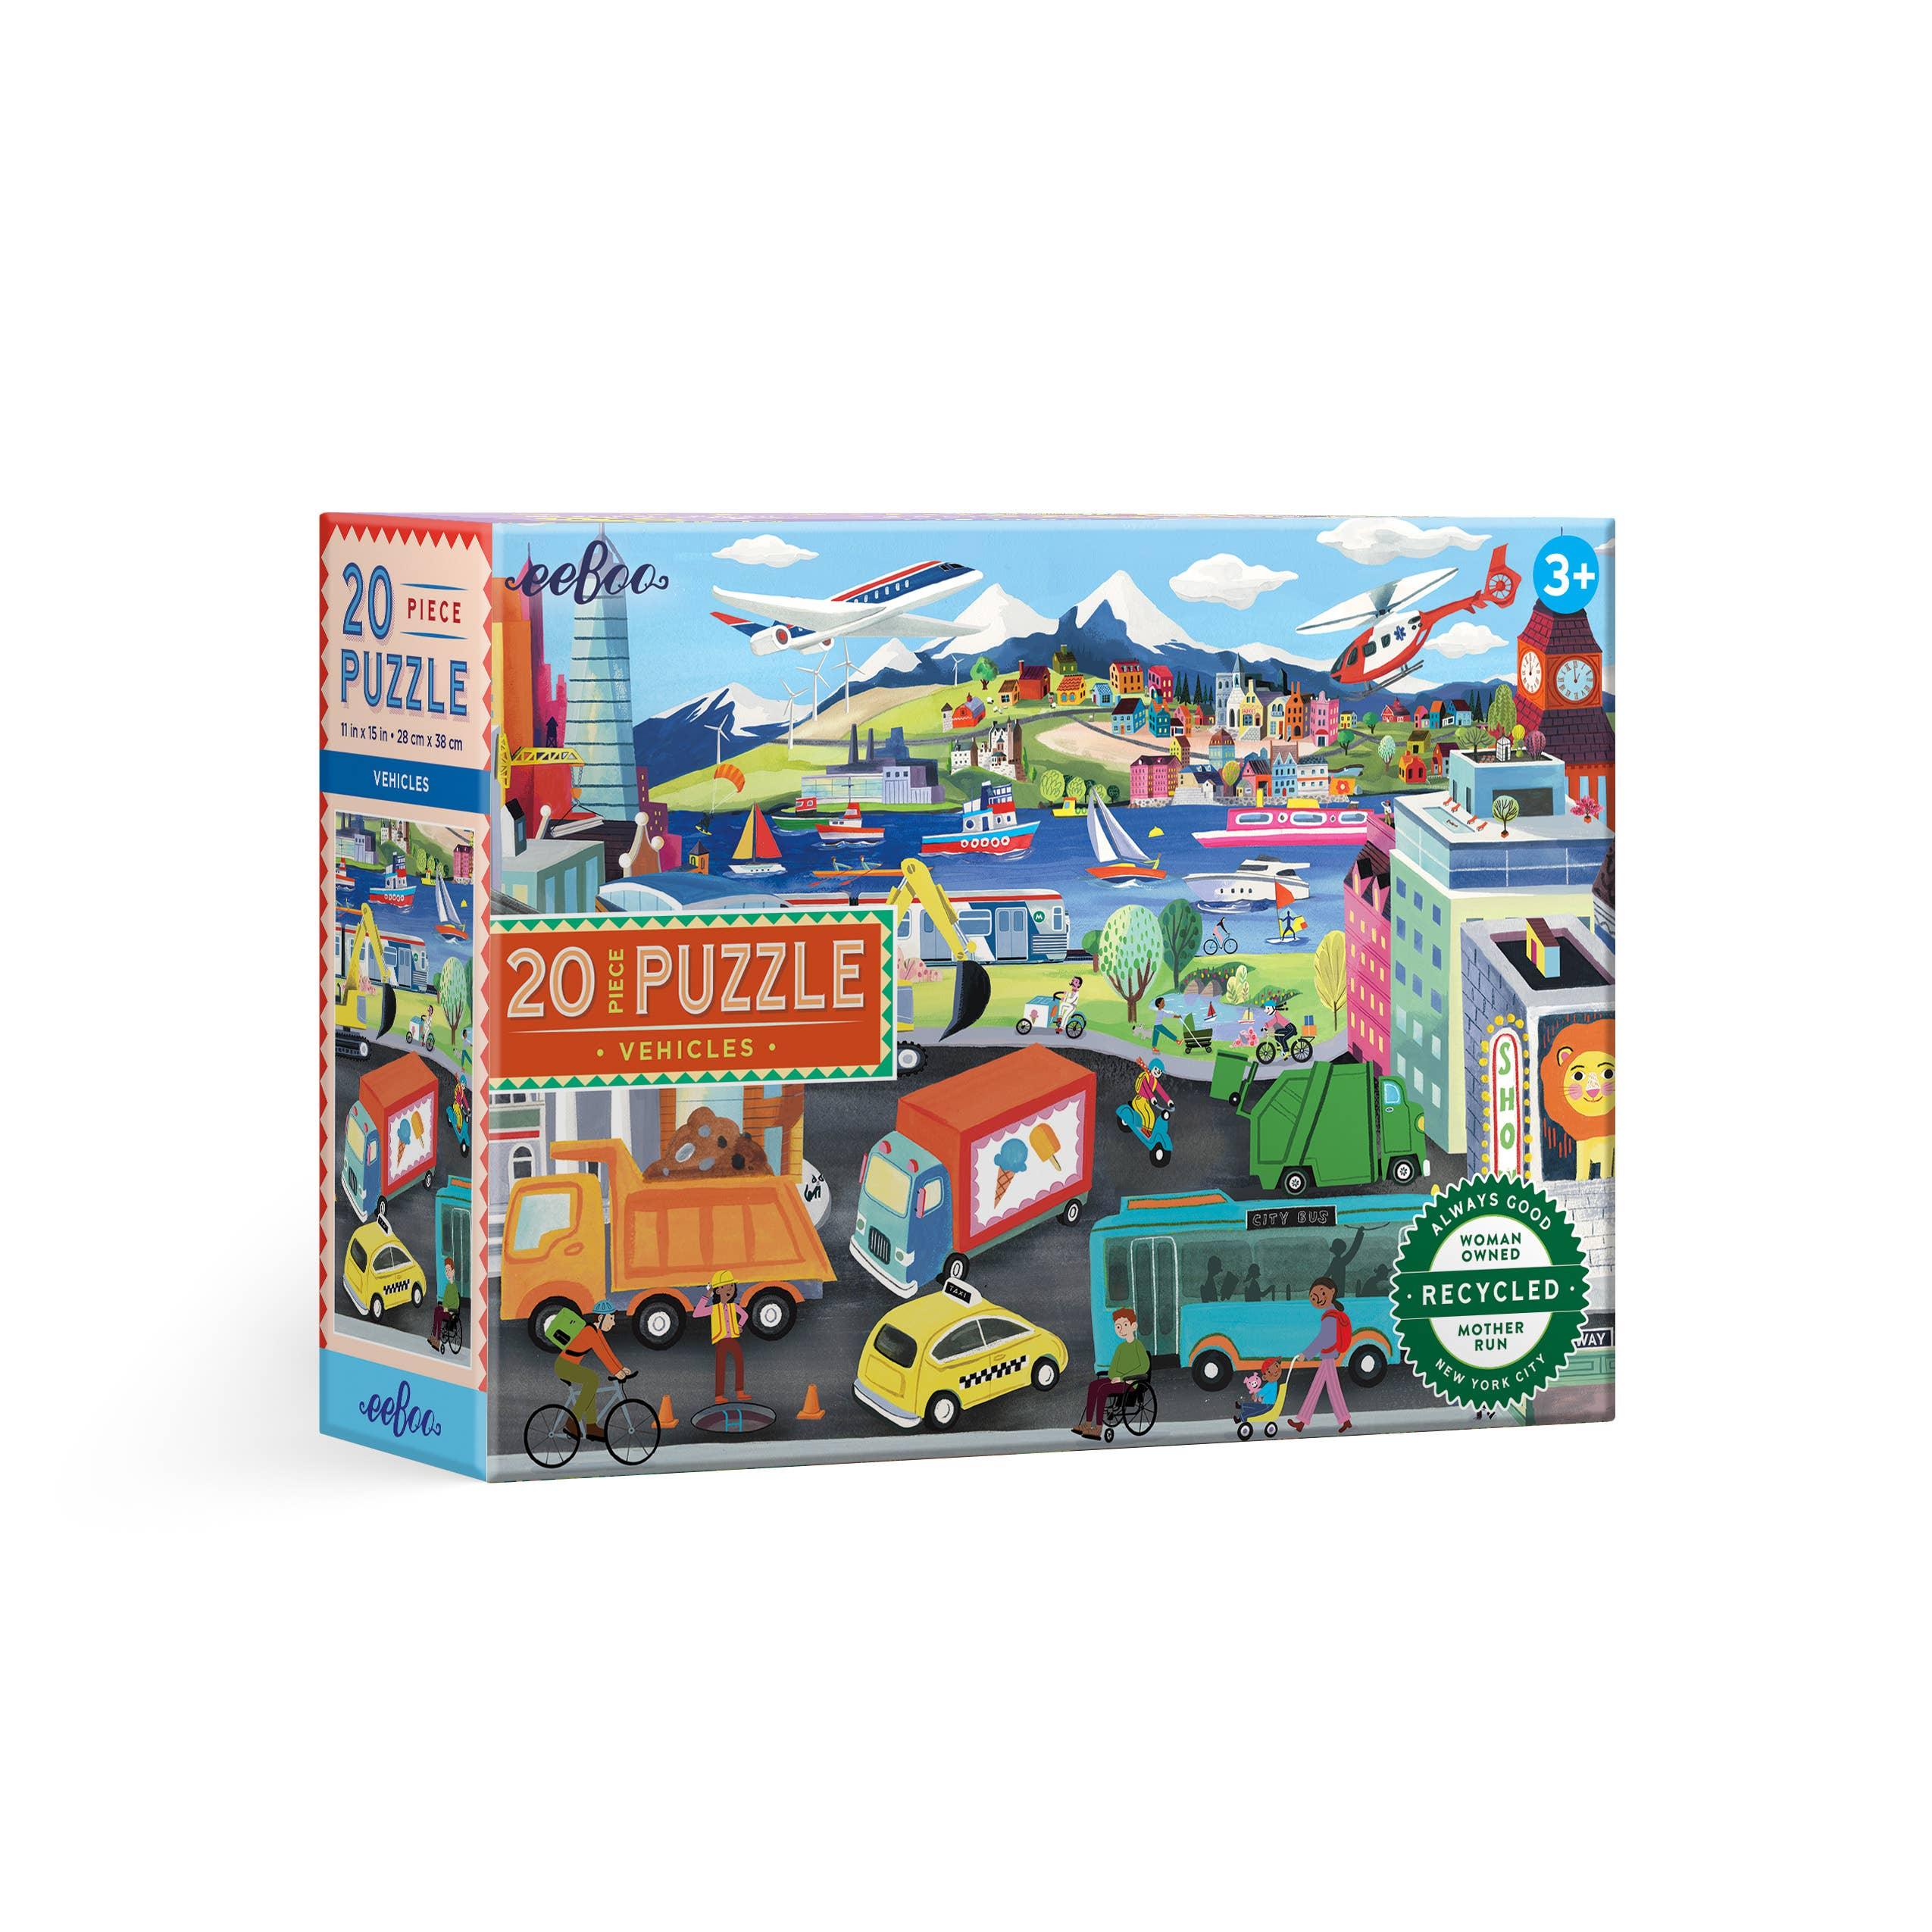 Vehicles 20 Piece Puzzle - Why and Whale